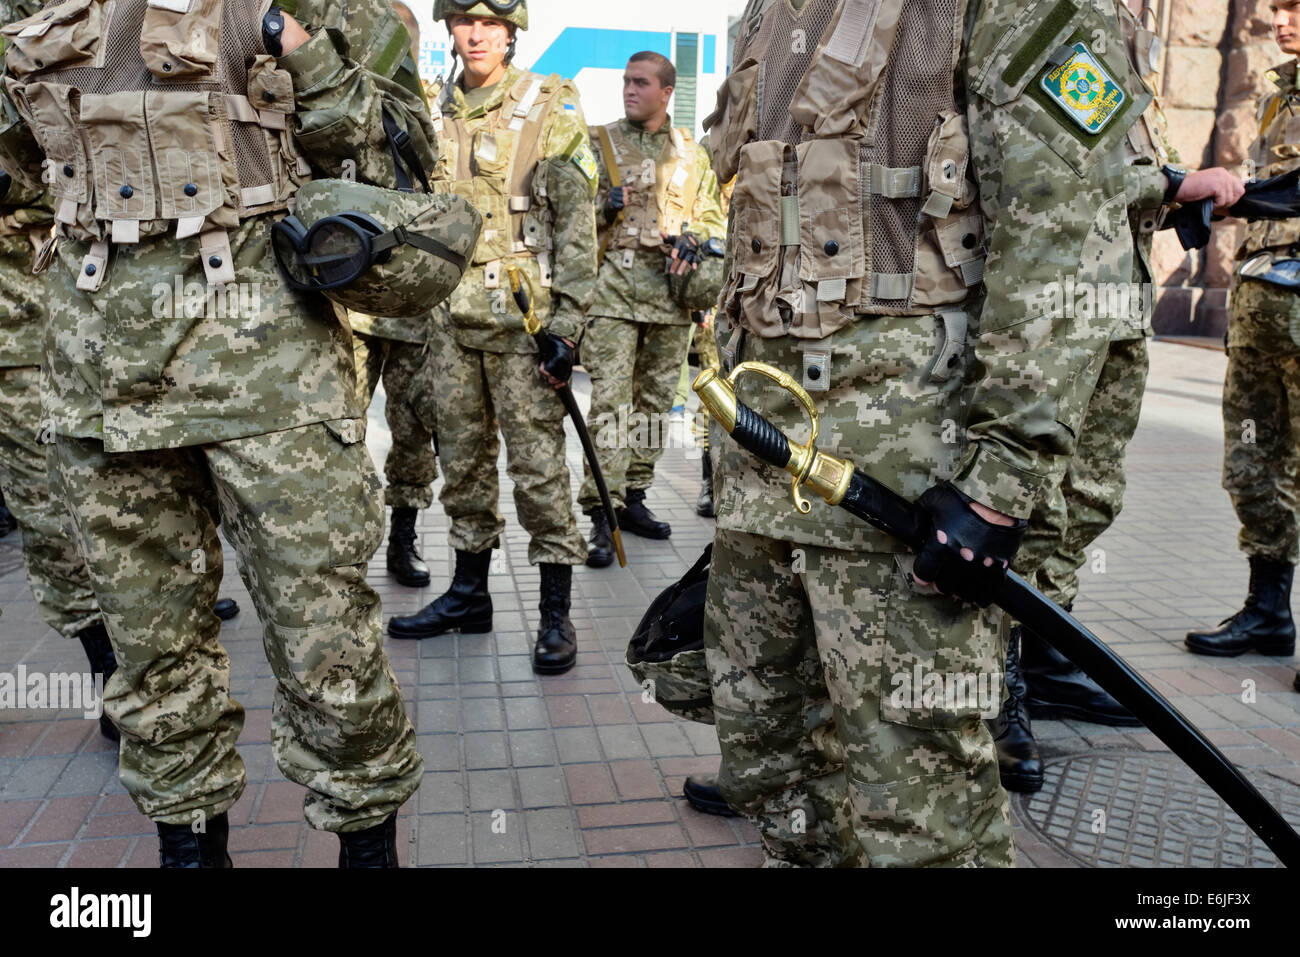 Kiev, Ukraine, 24th Aug, 2014. More than 2 thousands servicemen and Ukrainian military equipment such as armored troop carriers, cars, 'Grad' and 'Smerch' missiles systems take part in military parade on Independence Day of Ukraine. Credit:  Oleksandr Rupeta/Alamy Live News Stock Photo